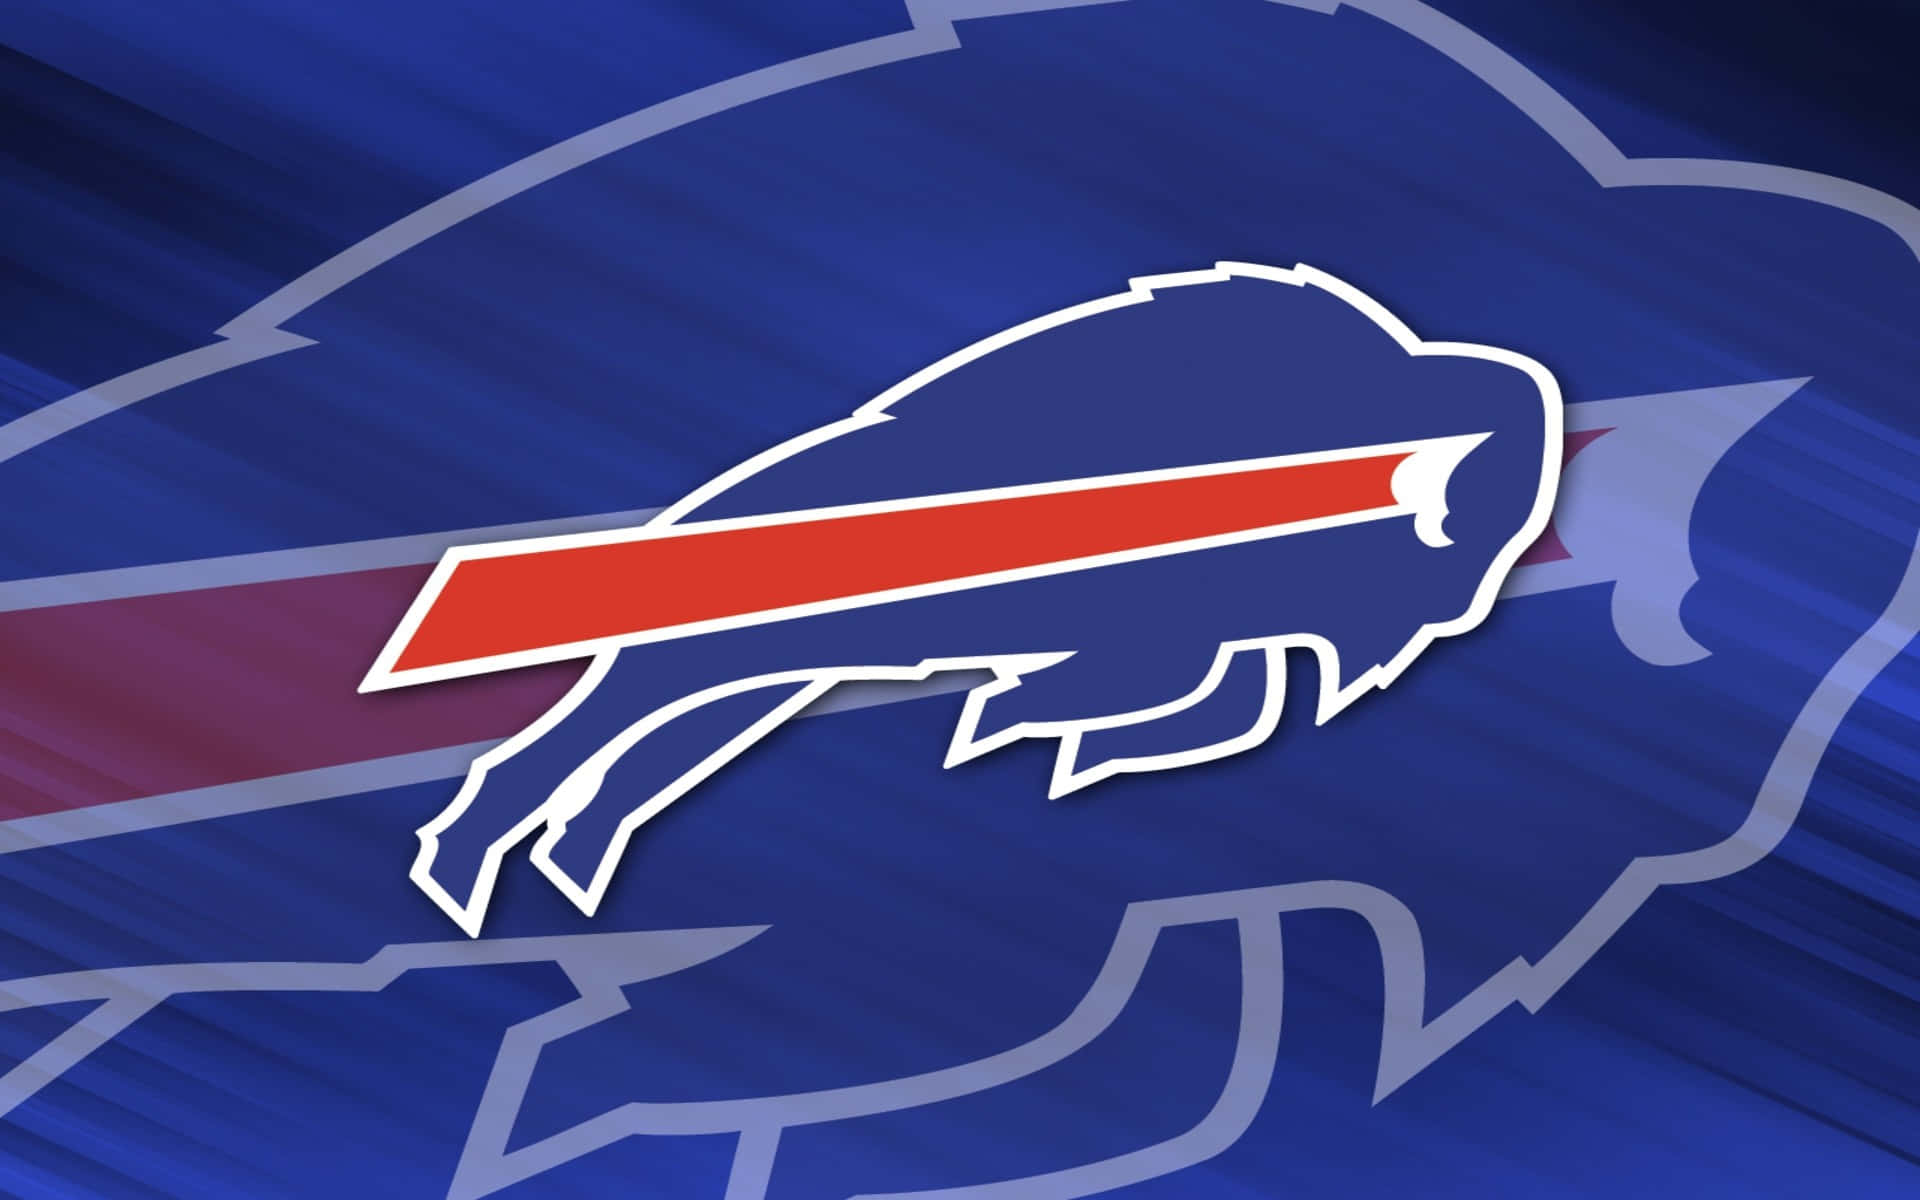 "The official home of the Buffalo Bills in Orchard Park"